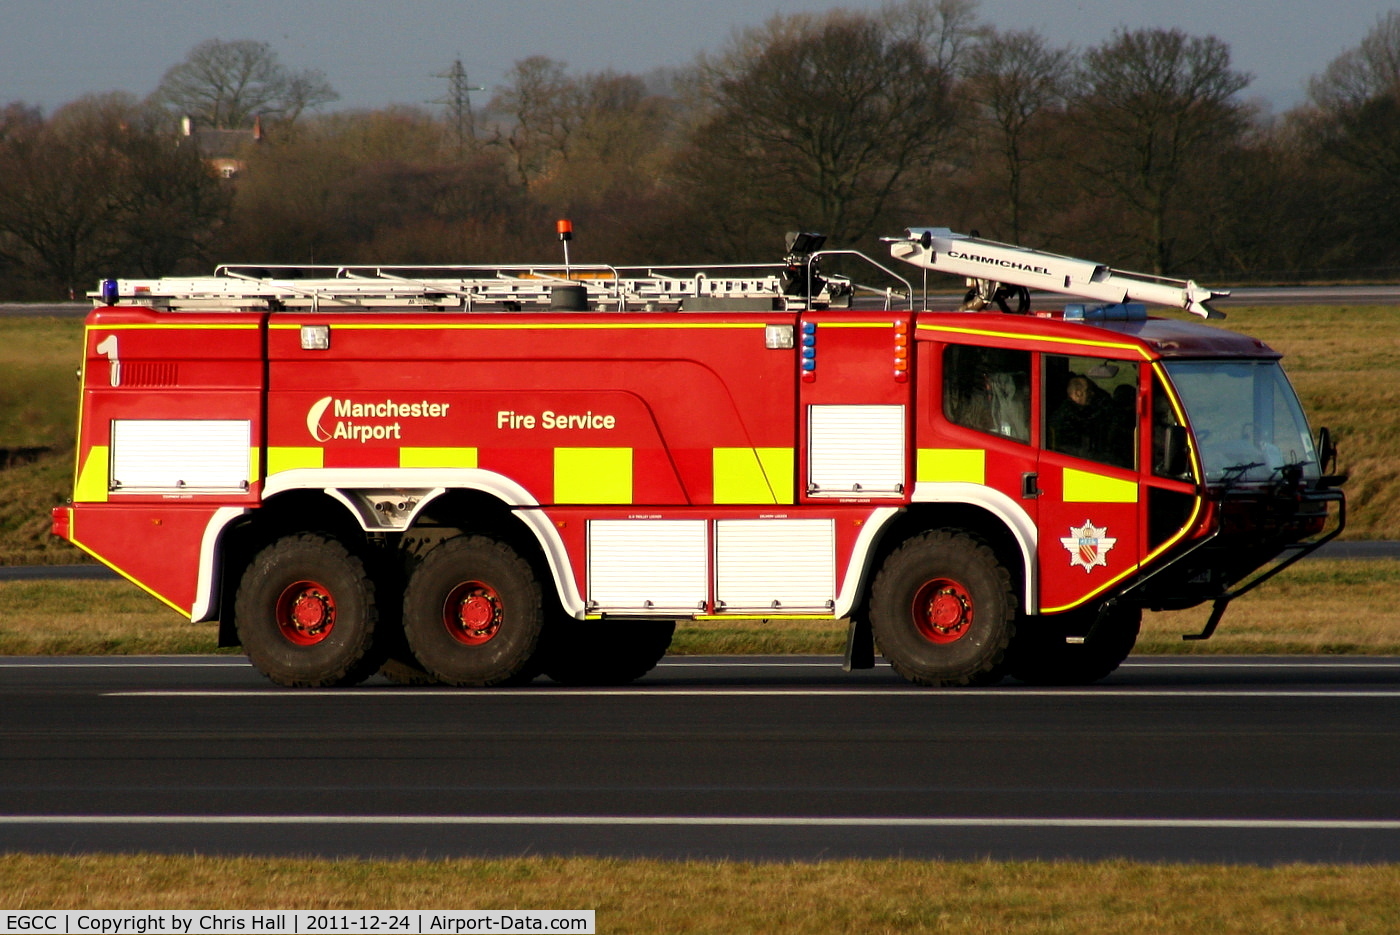 Manchester Airport, Manchester, England United Kingdom (EGCC) - Fire Truck #1 at Manchester Airport